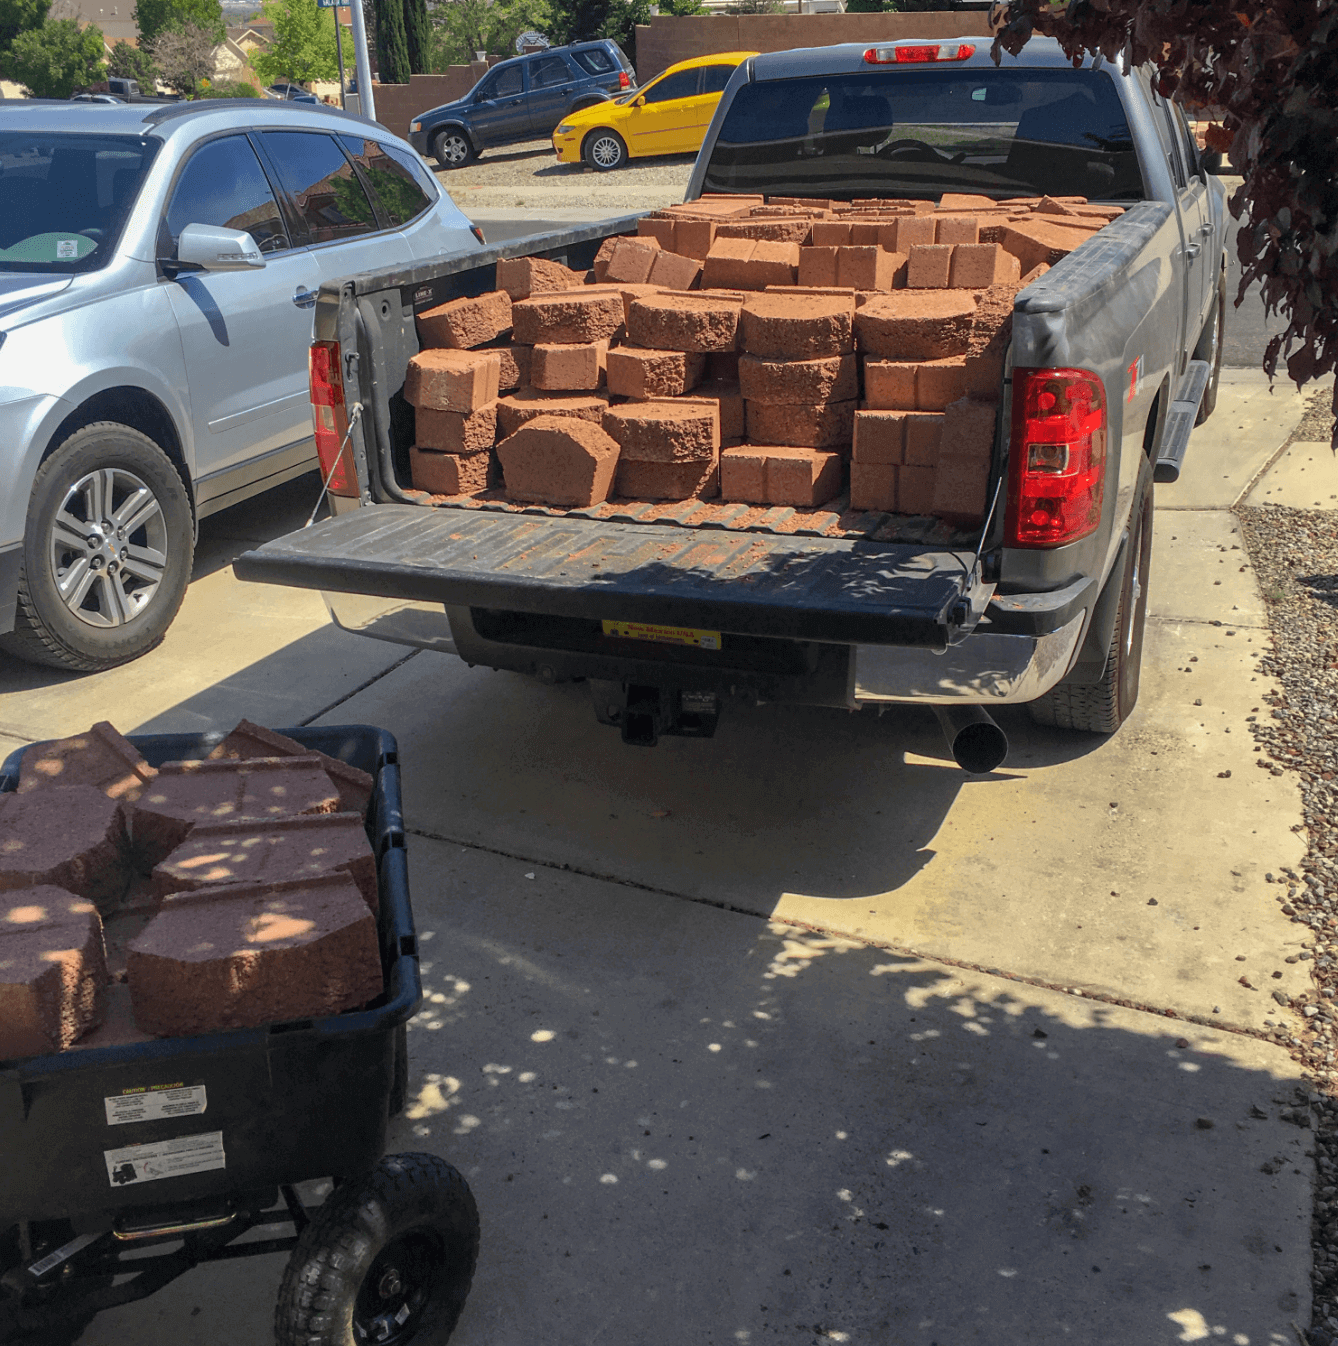 Truck filled with bricks